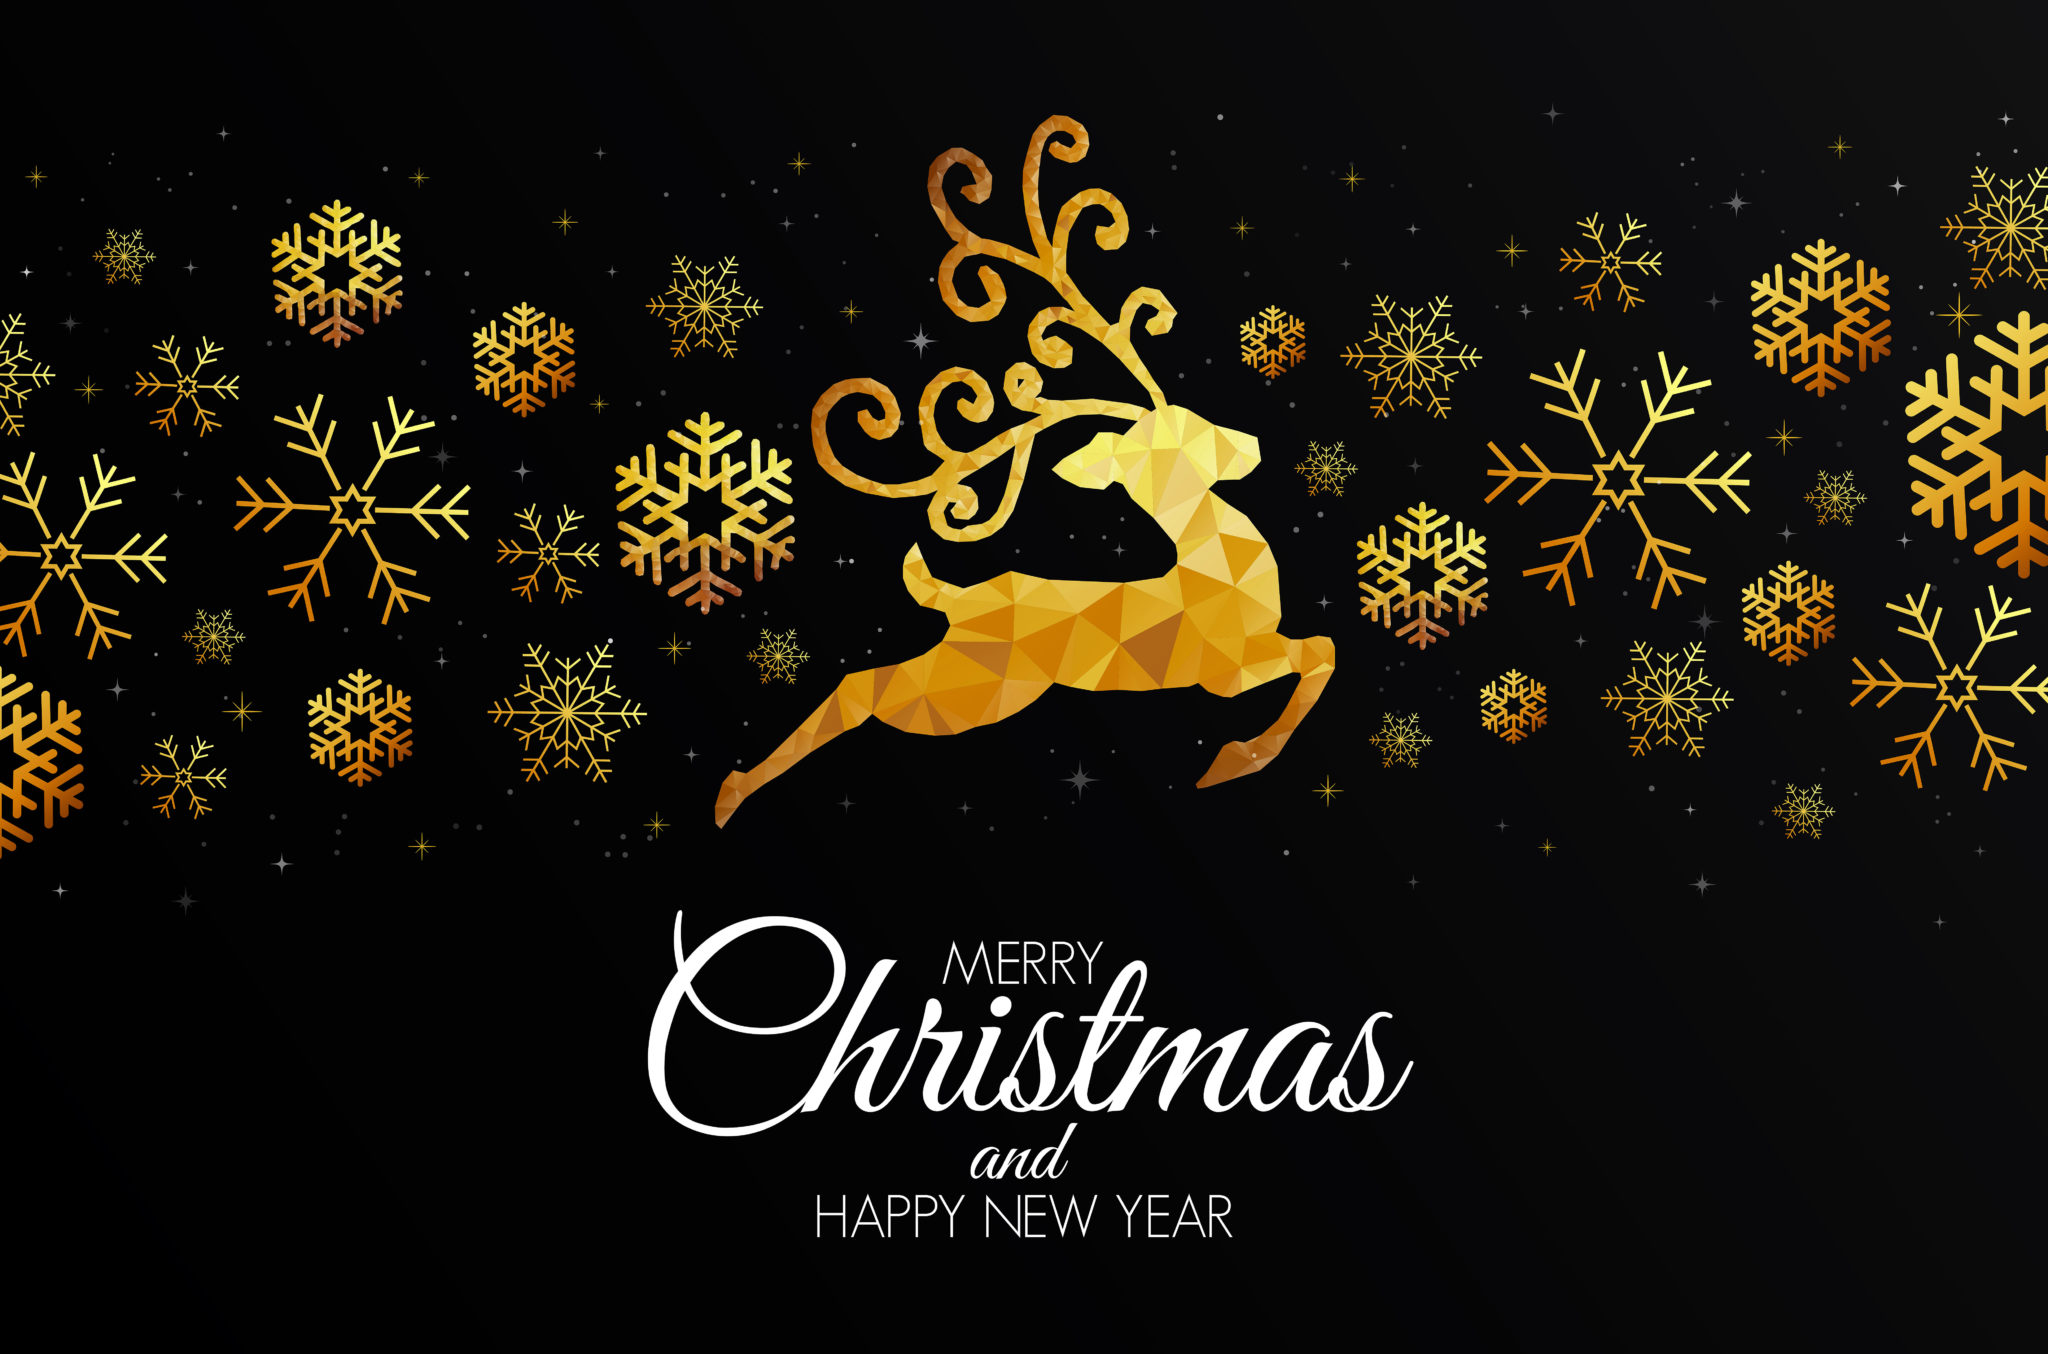 Low Poly Golden Snow Christmas Card Template for Pages